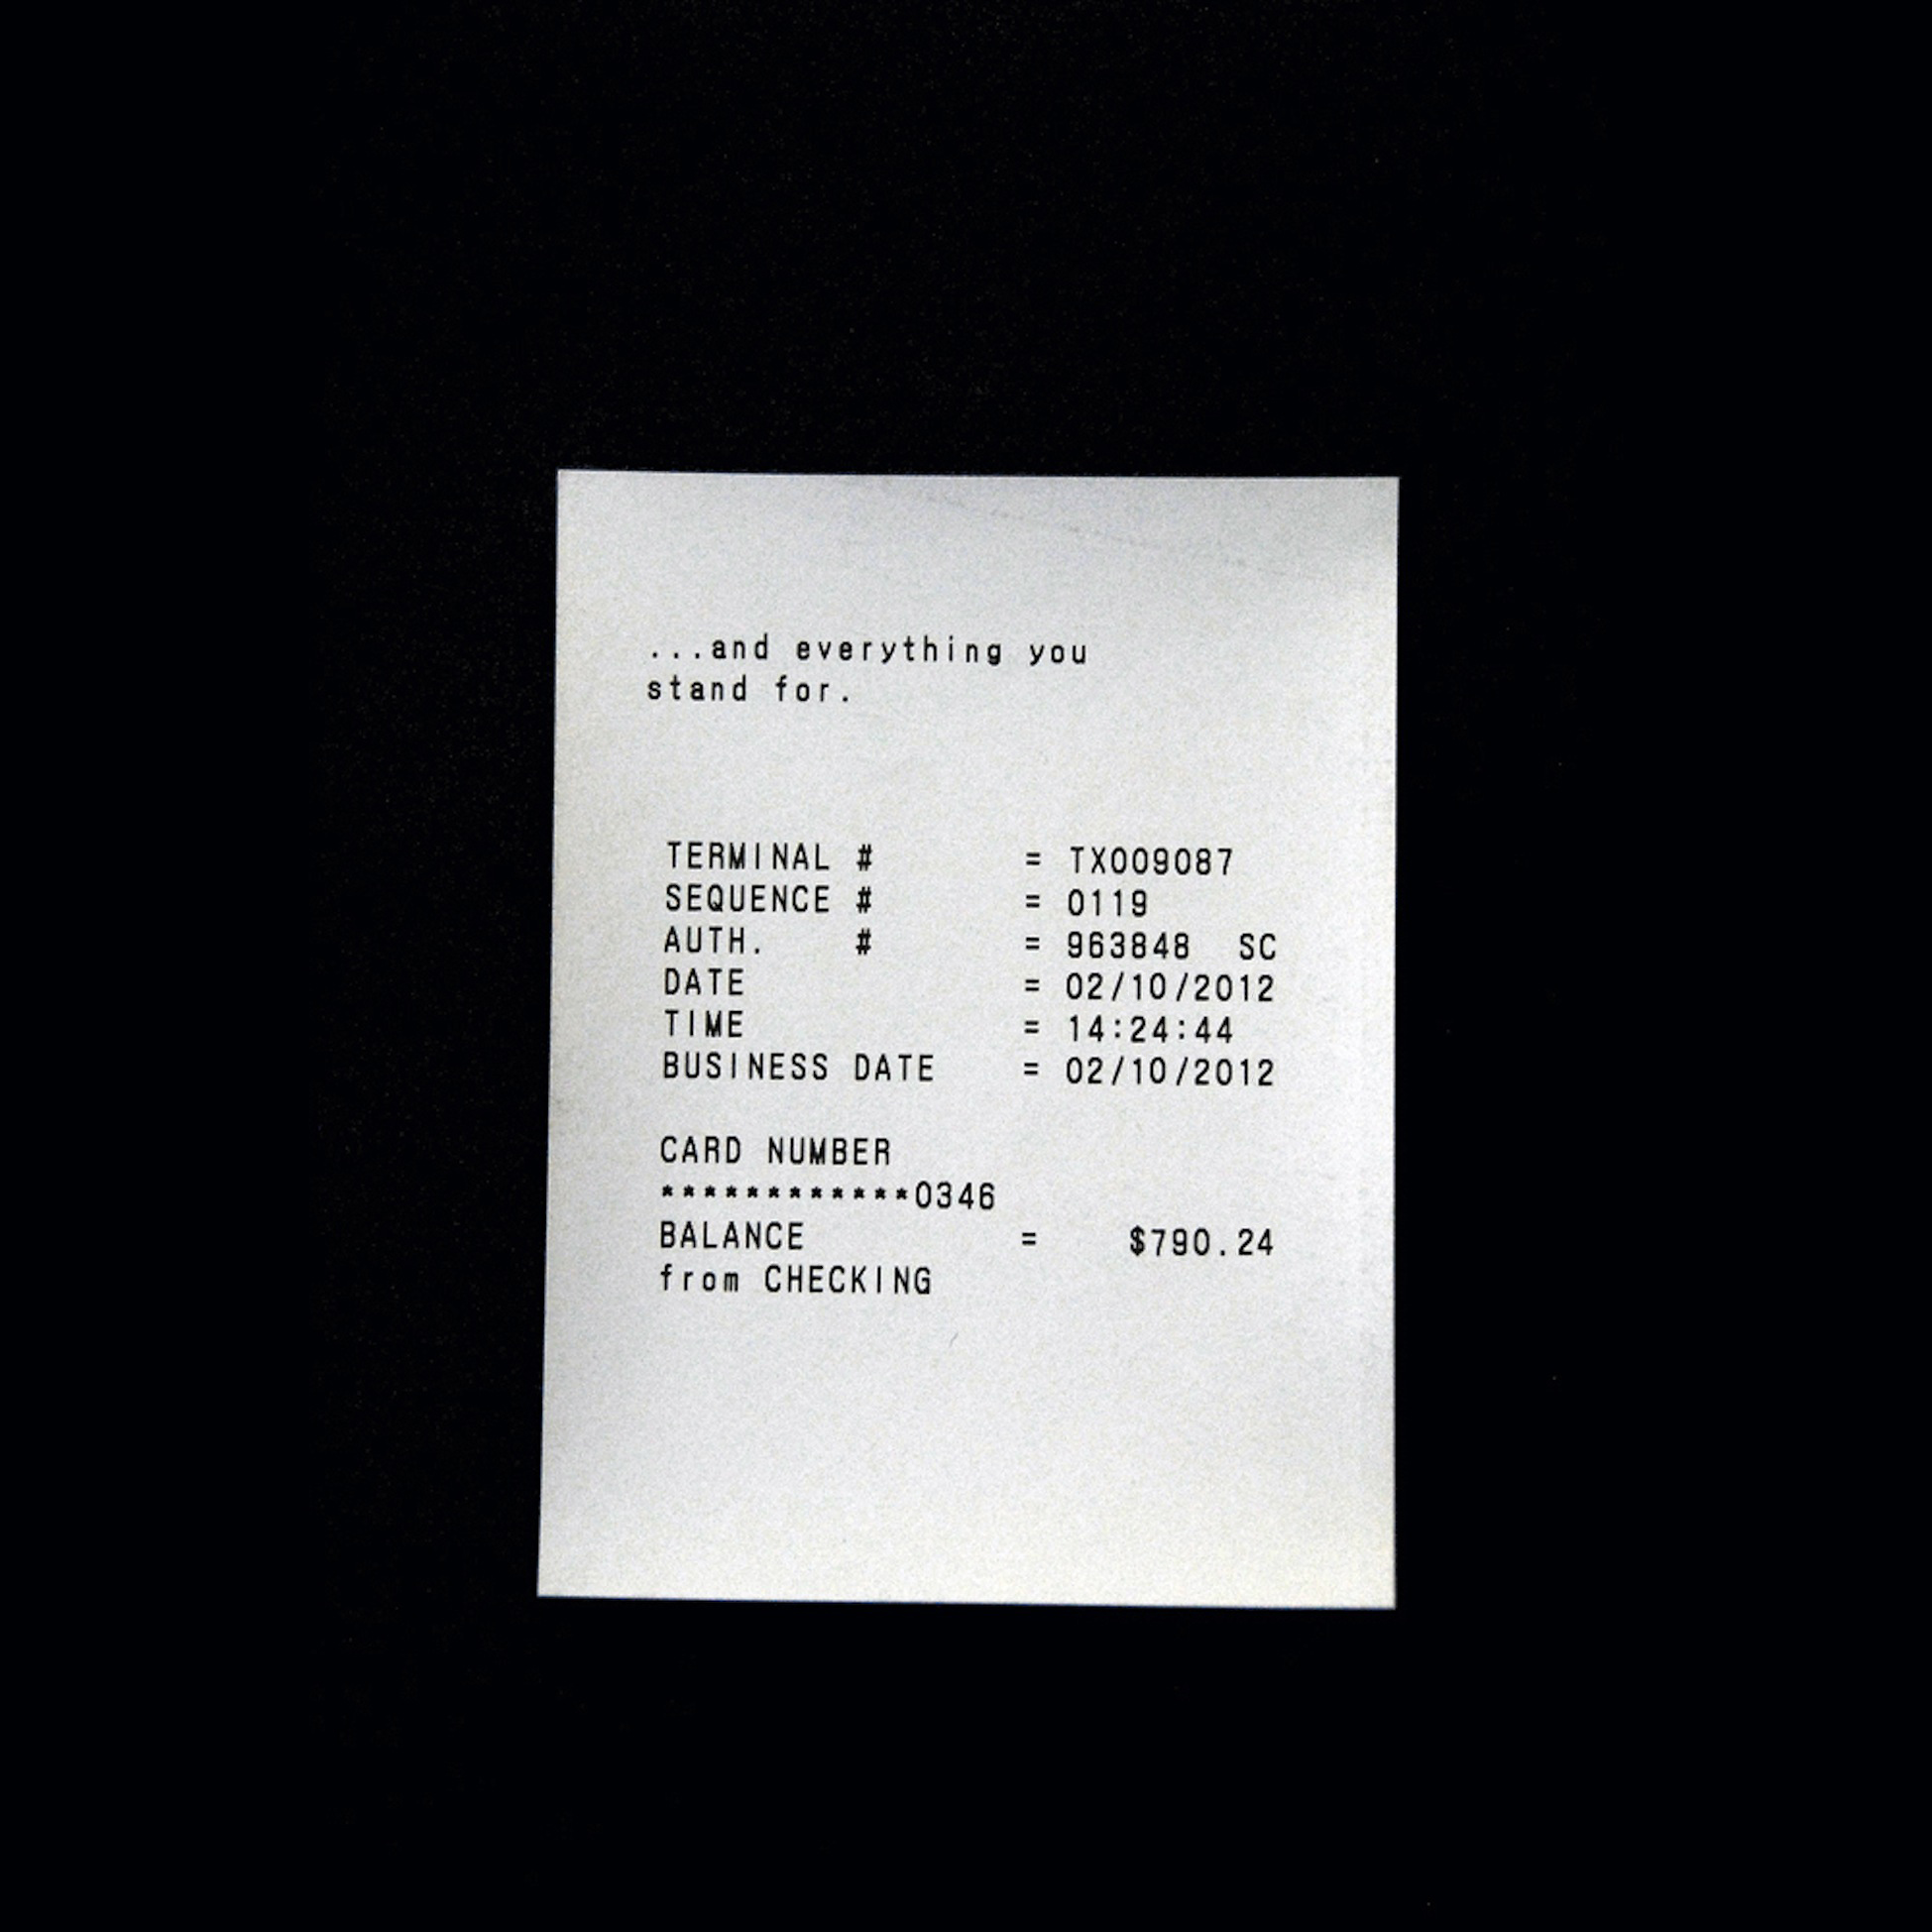 And Everything You Stand For (hacked ATM receipt), 2012